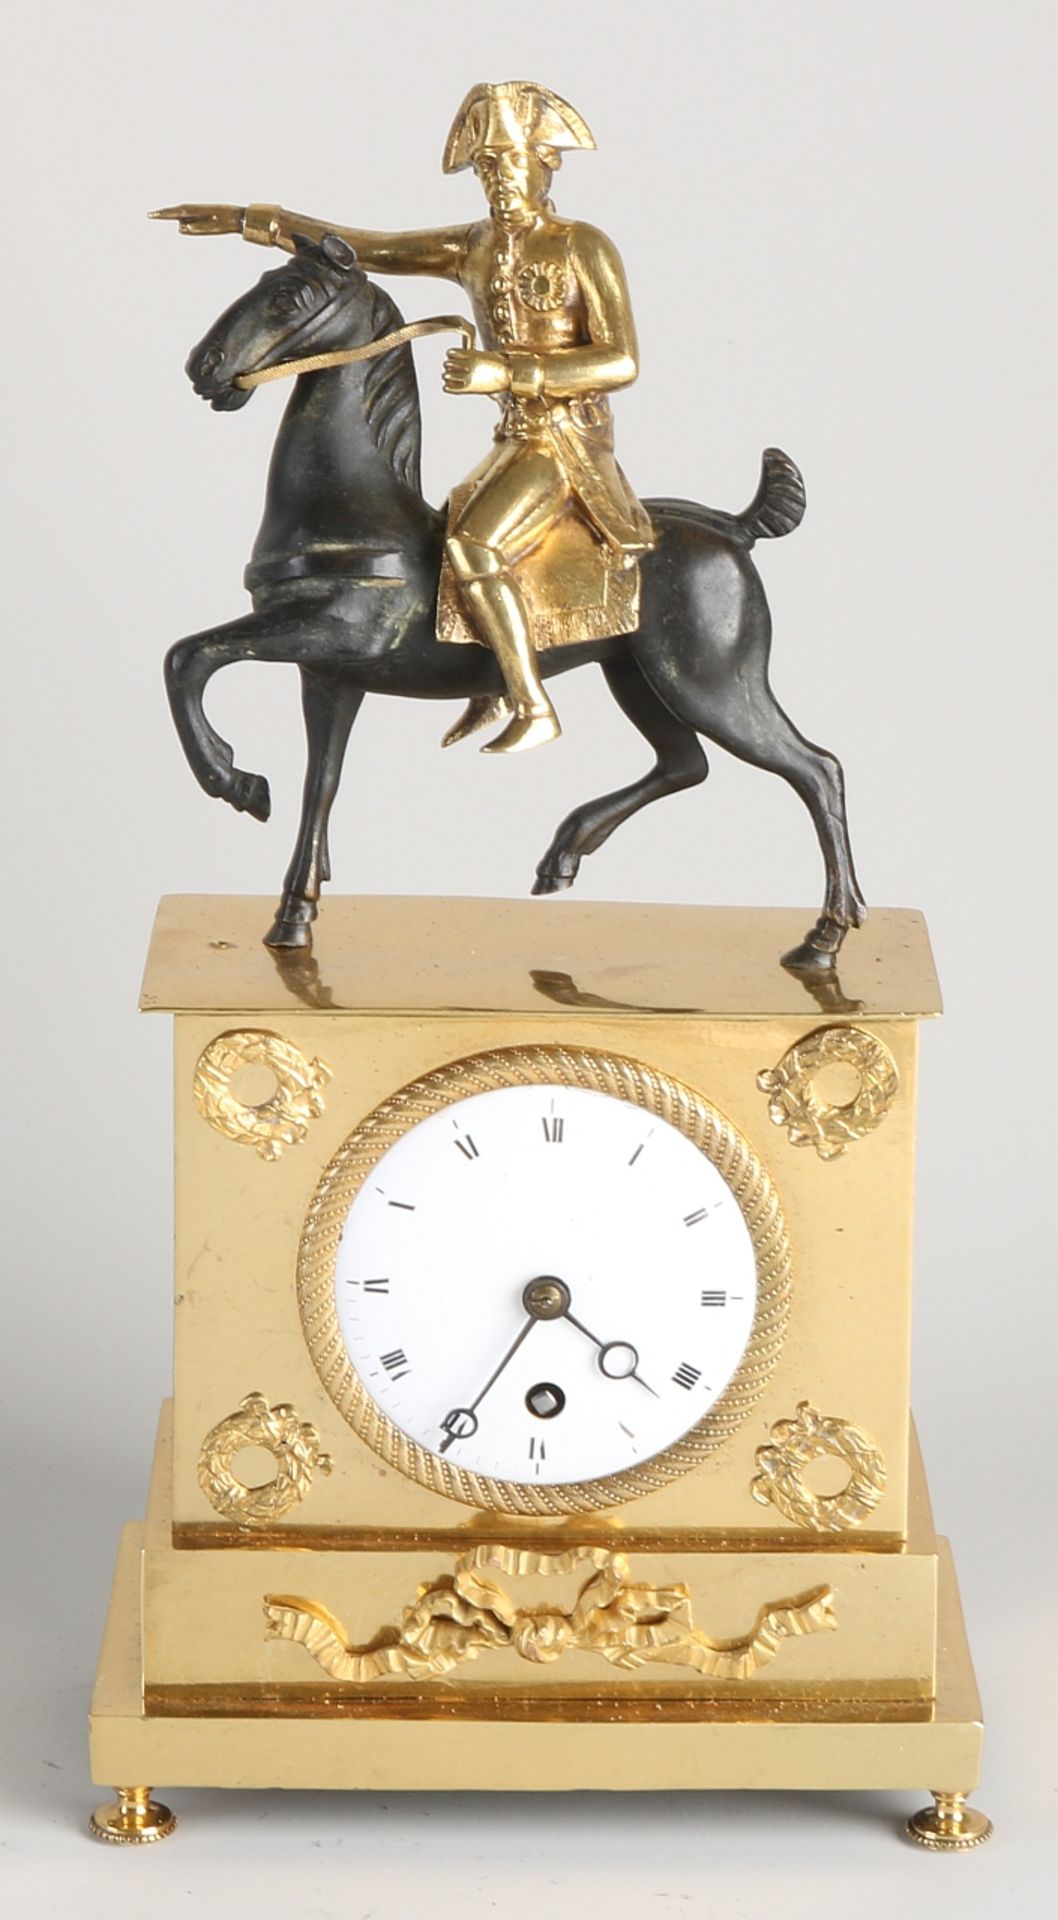 Gold-plated Empire mantel clock